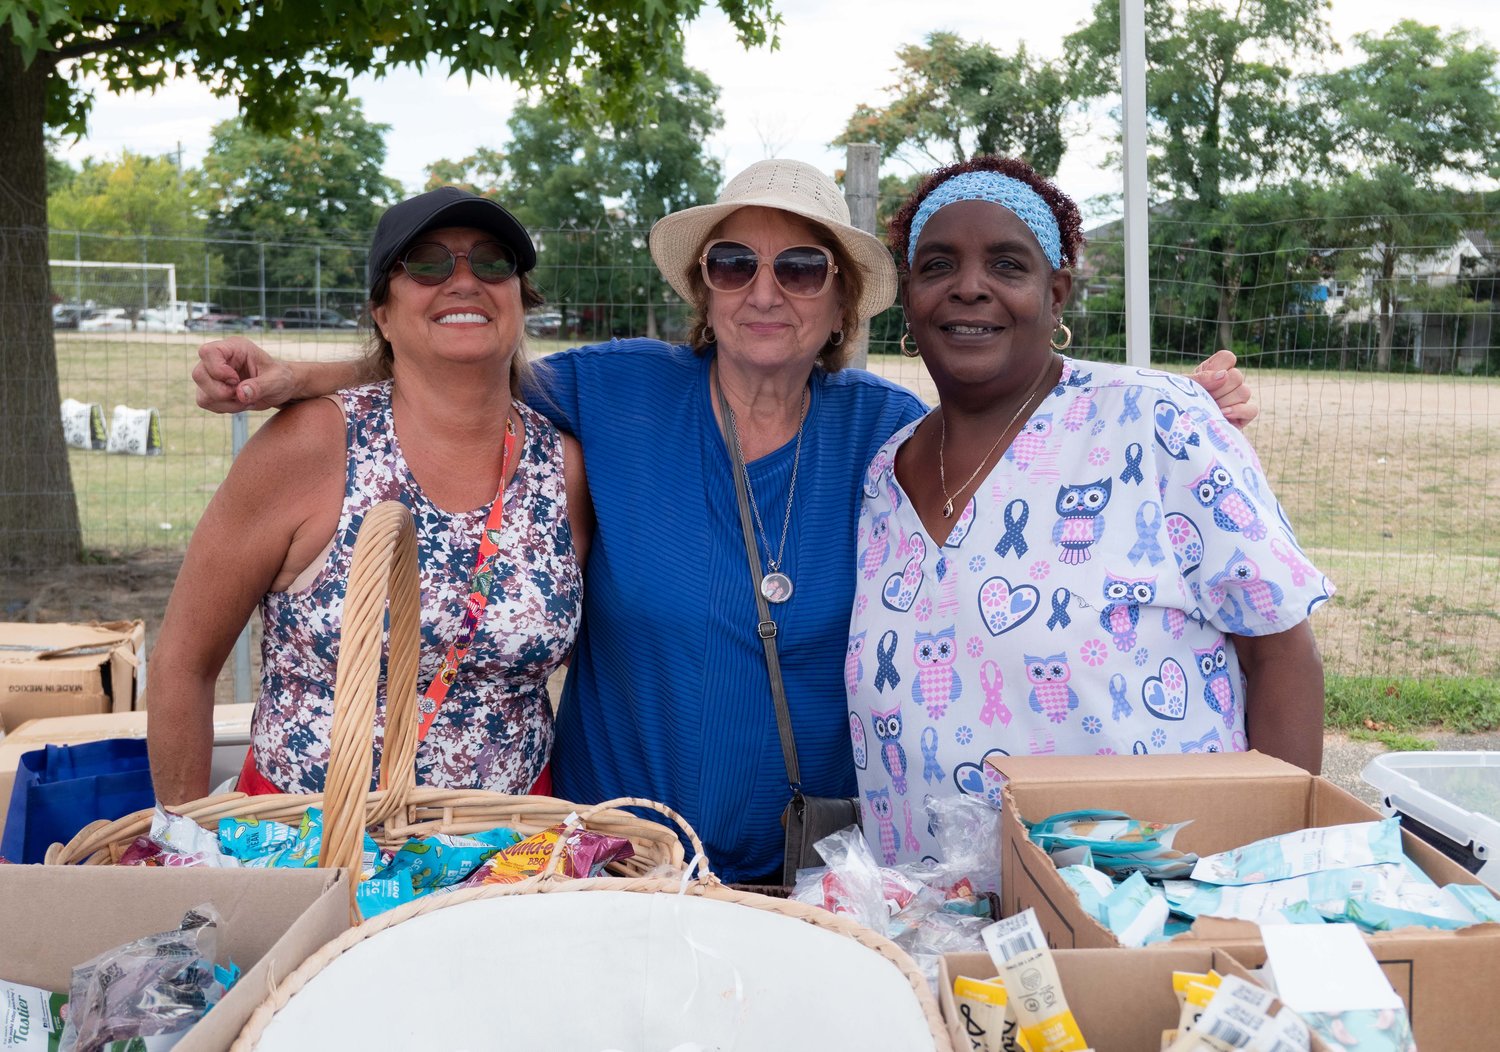 Rita Corso, left, Maria Artusa and Diane Tyler manned one of several booths at Inwood Day.